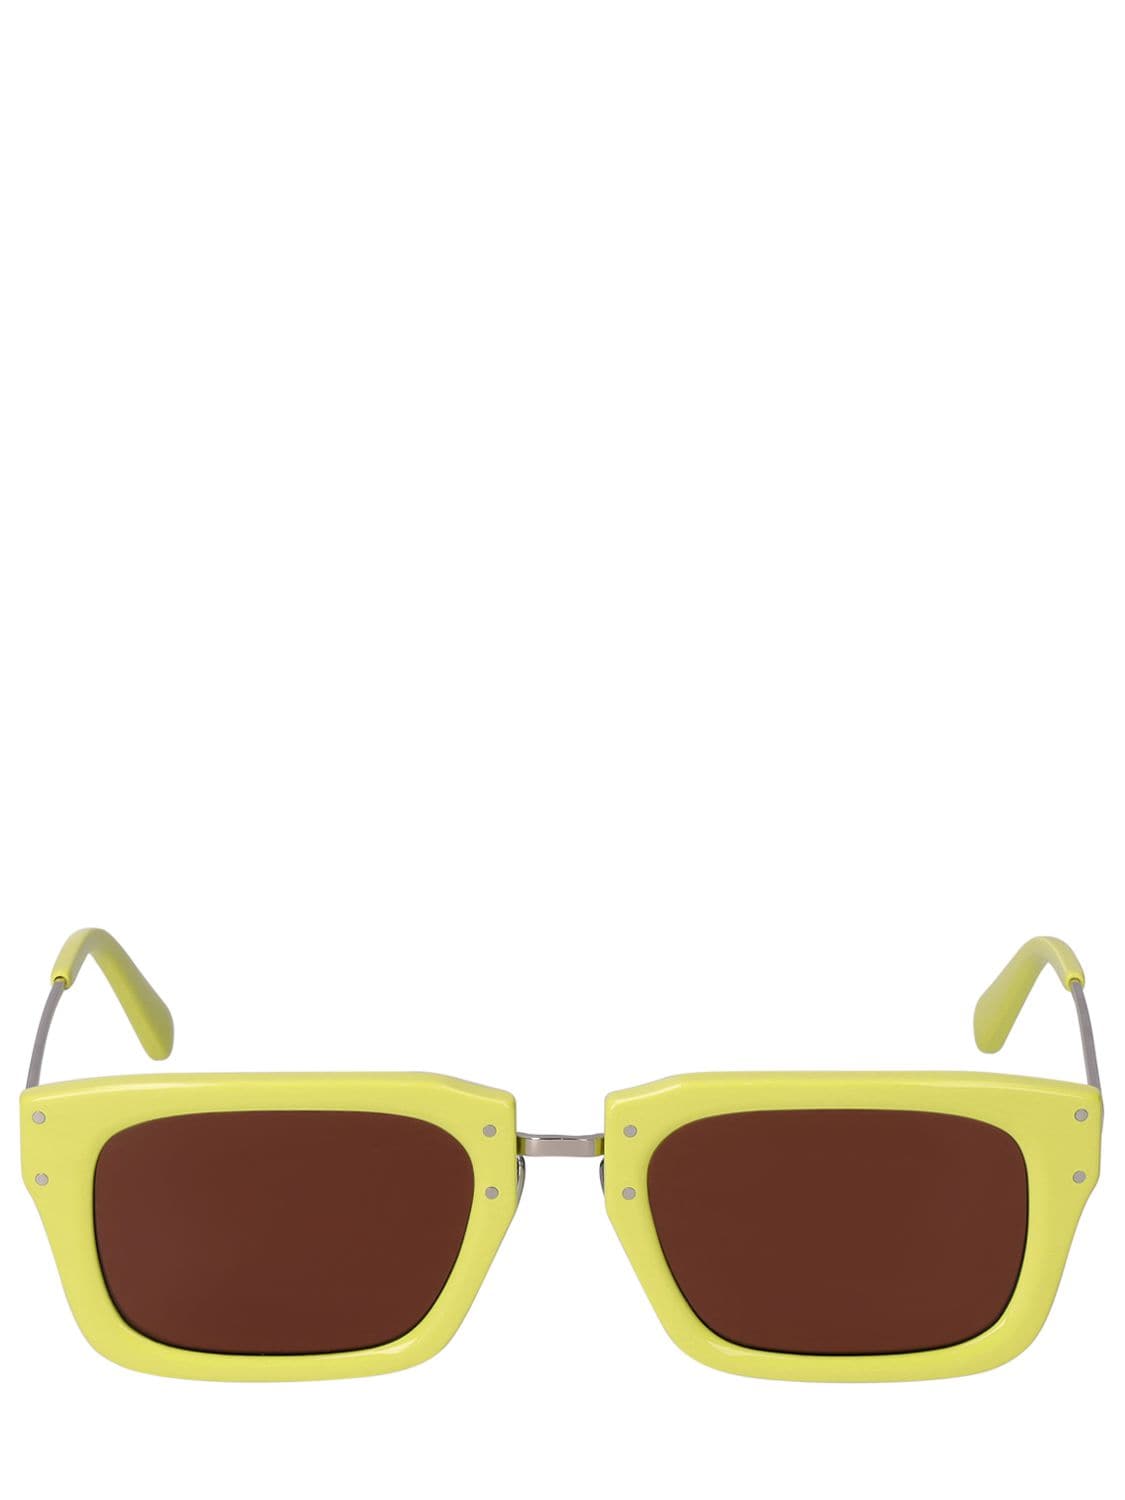 Jacquemus Les Lunettes Soli Sunglasses In Yellow,brown